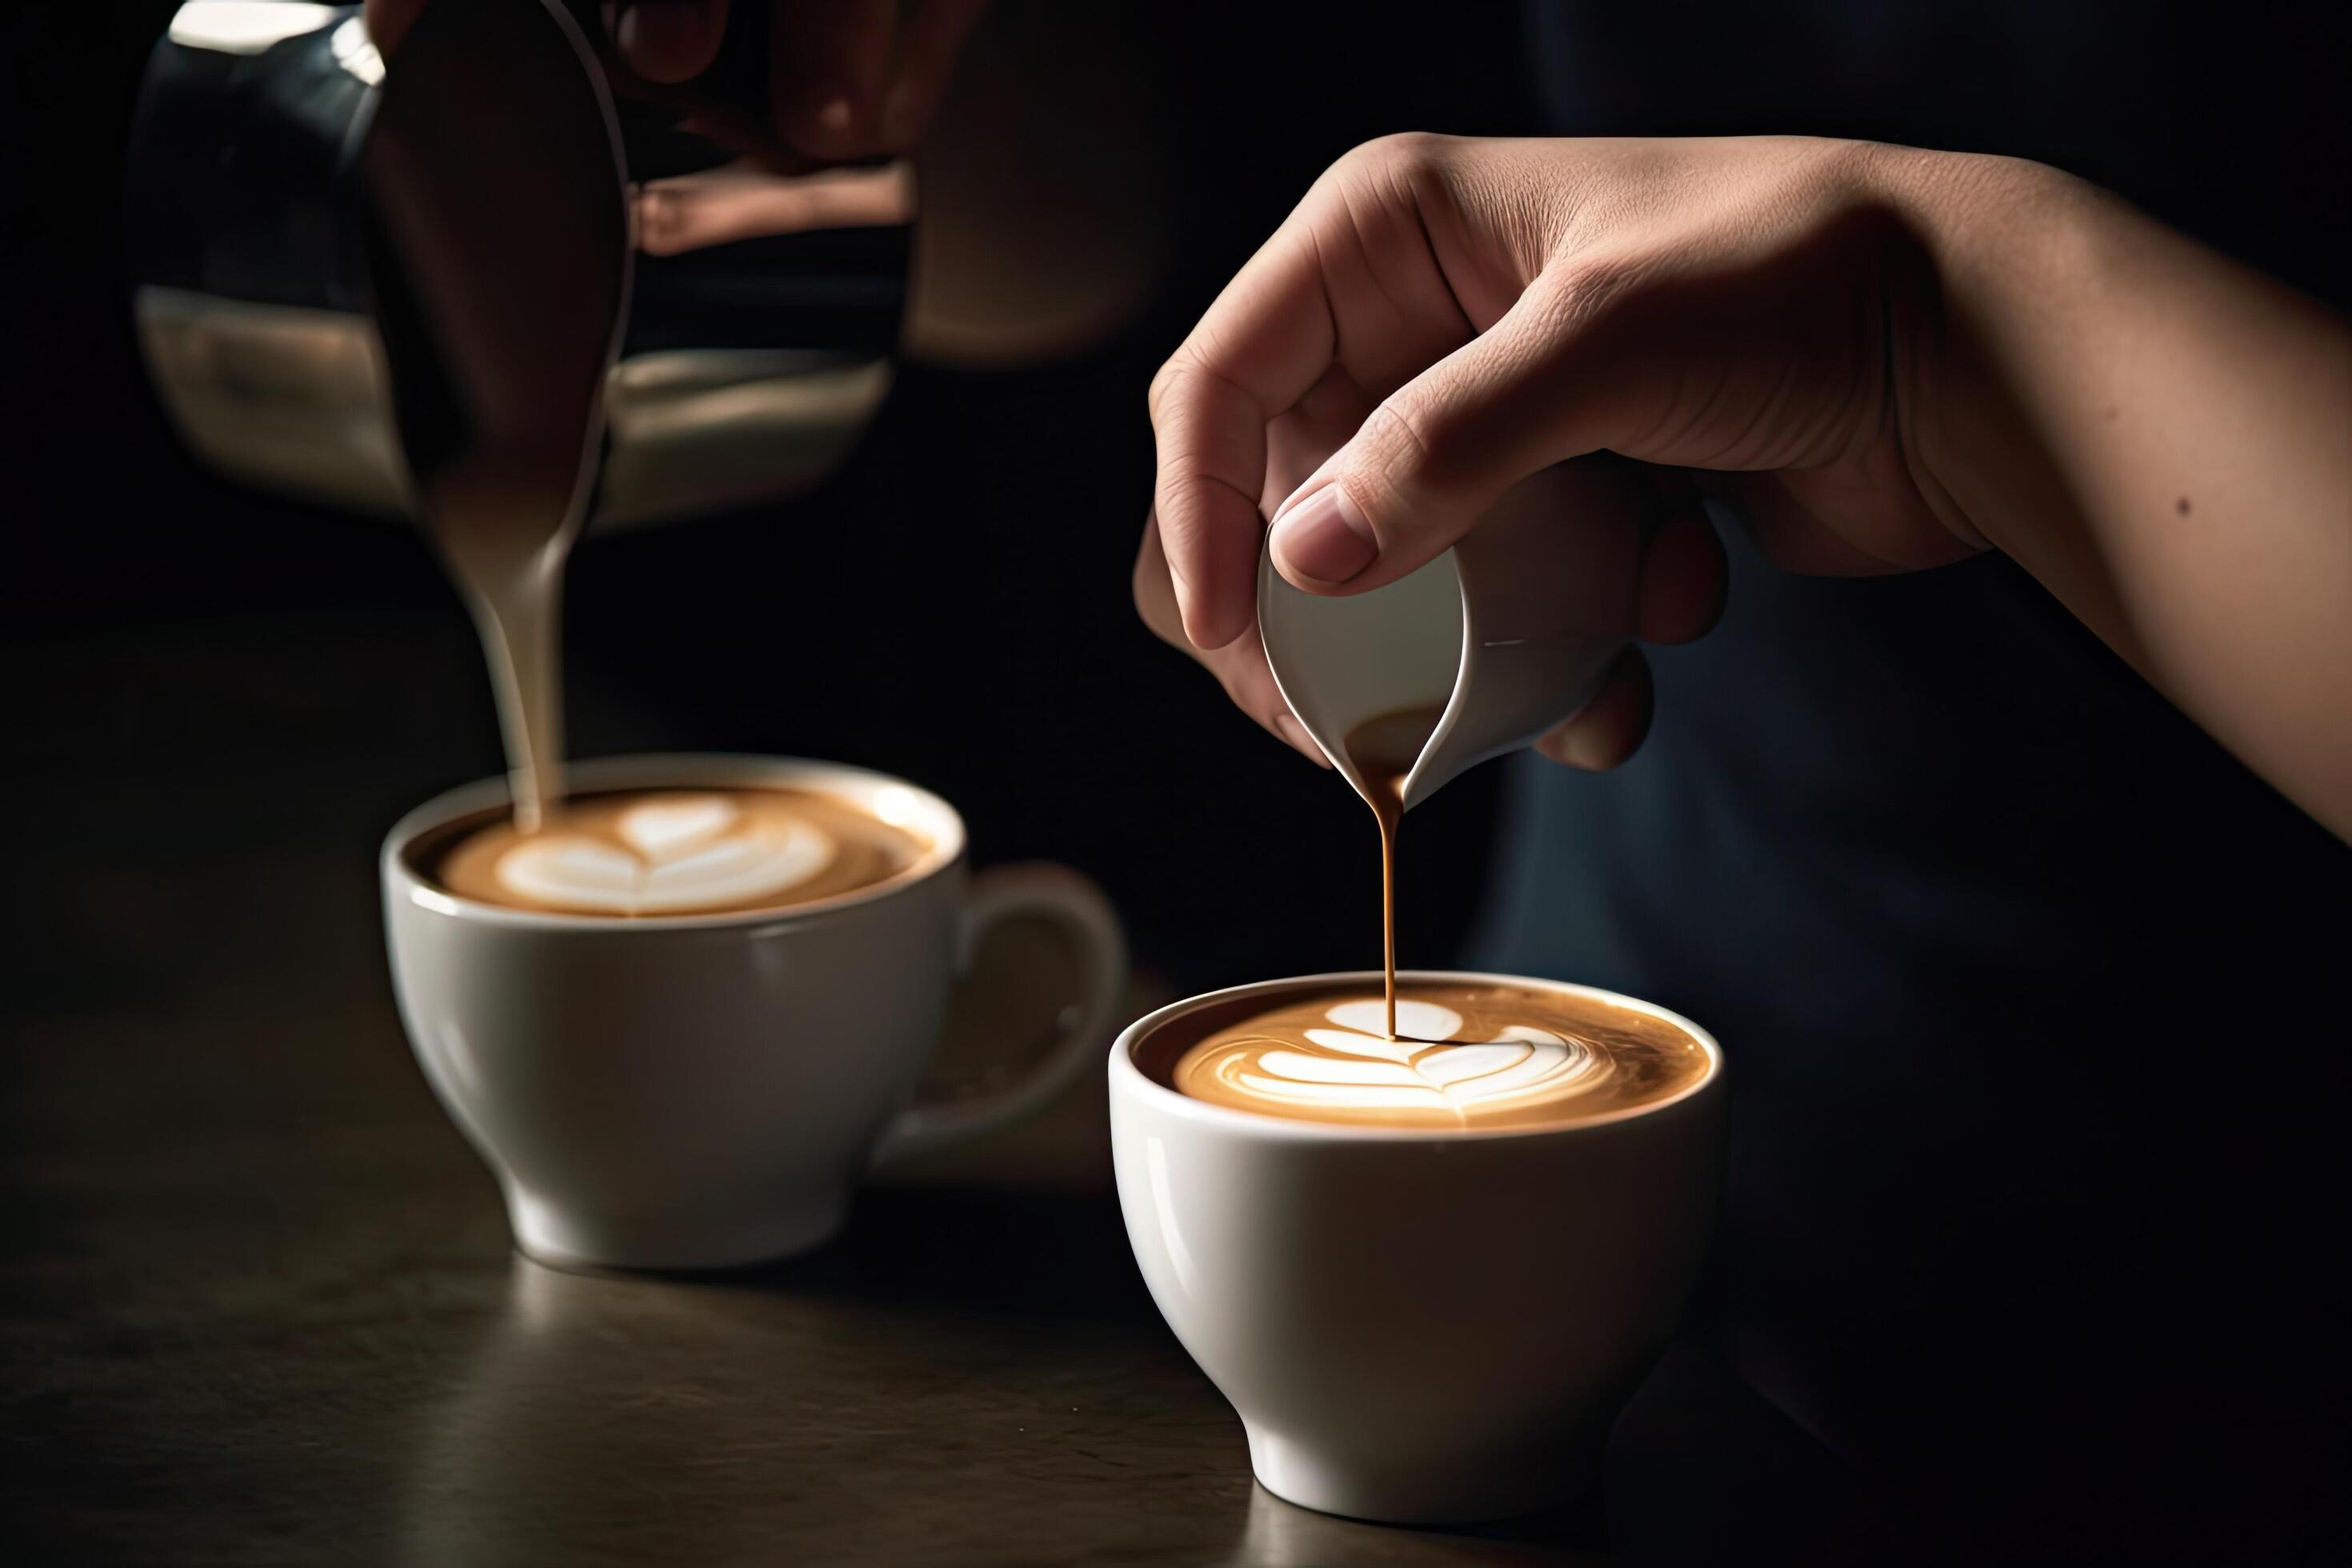 https://static.vecteezy.com/system/resources/previews/024/570/282/large_2x/barista-making-latte-art-coffee-in-coffee-shop-a-coffee-cup-in-a-close-up-held-by-a-baristas-hand-and-pouring-coffee-ai-generated-free-photo.jpg